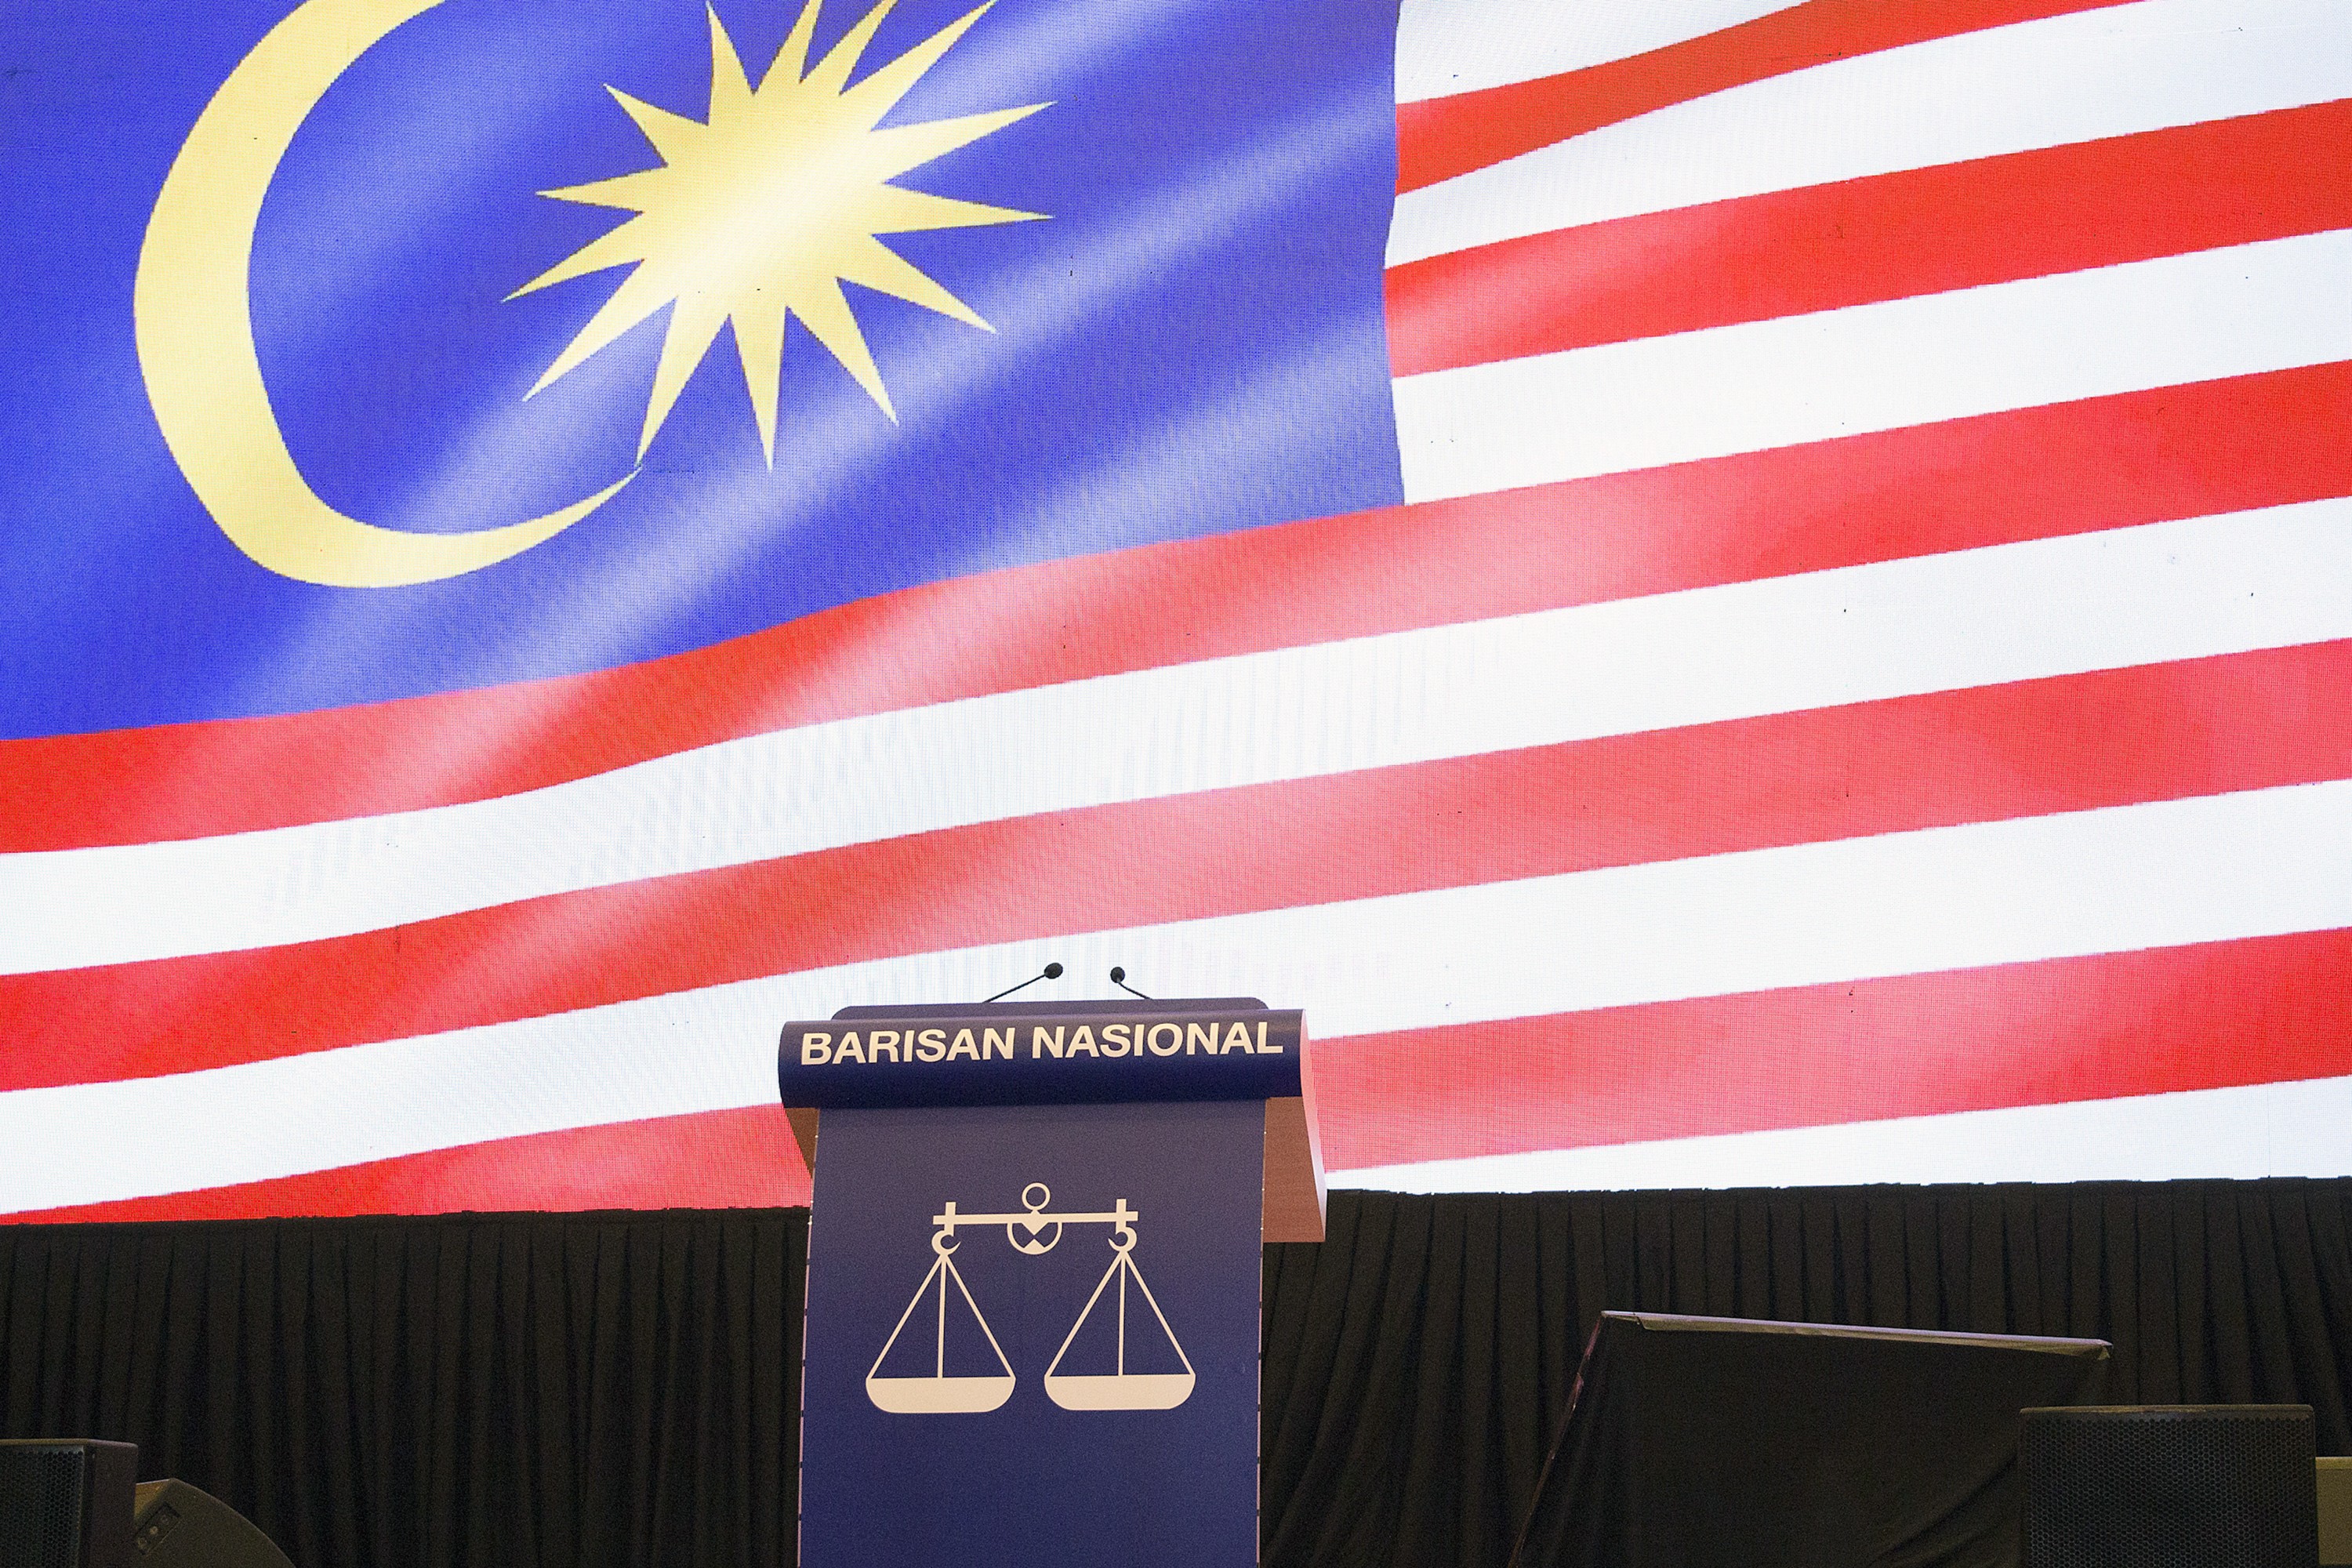 The recently ousted Barisan Nasional coalition is tipped to win in Tanjung Piai. Photo: Bloomberg